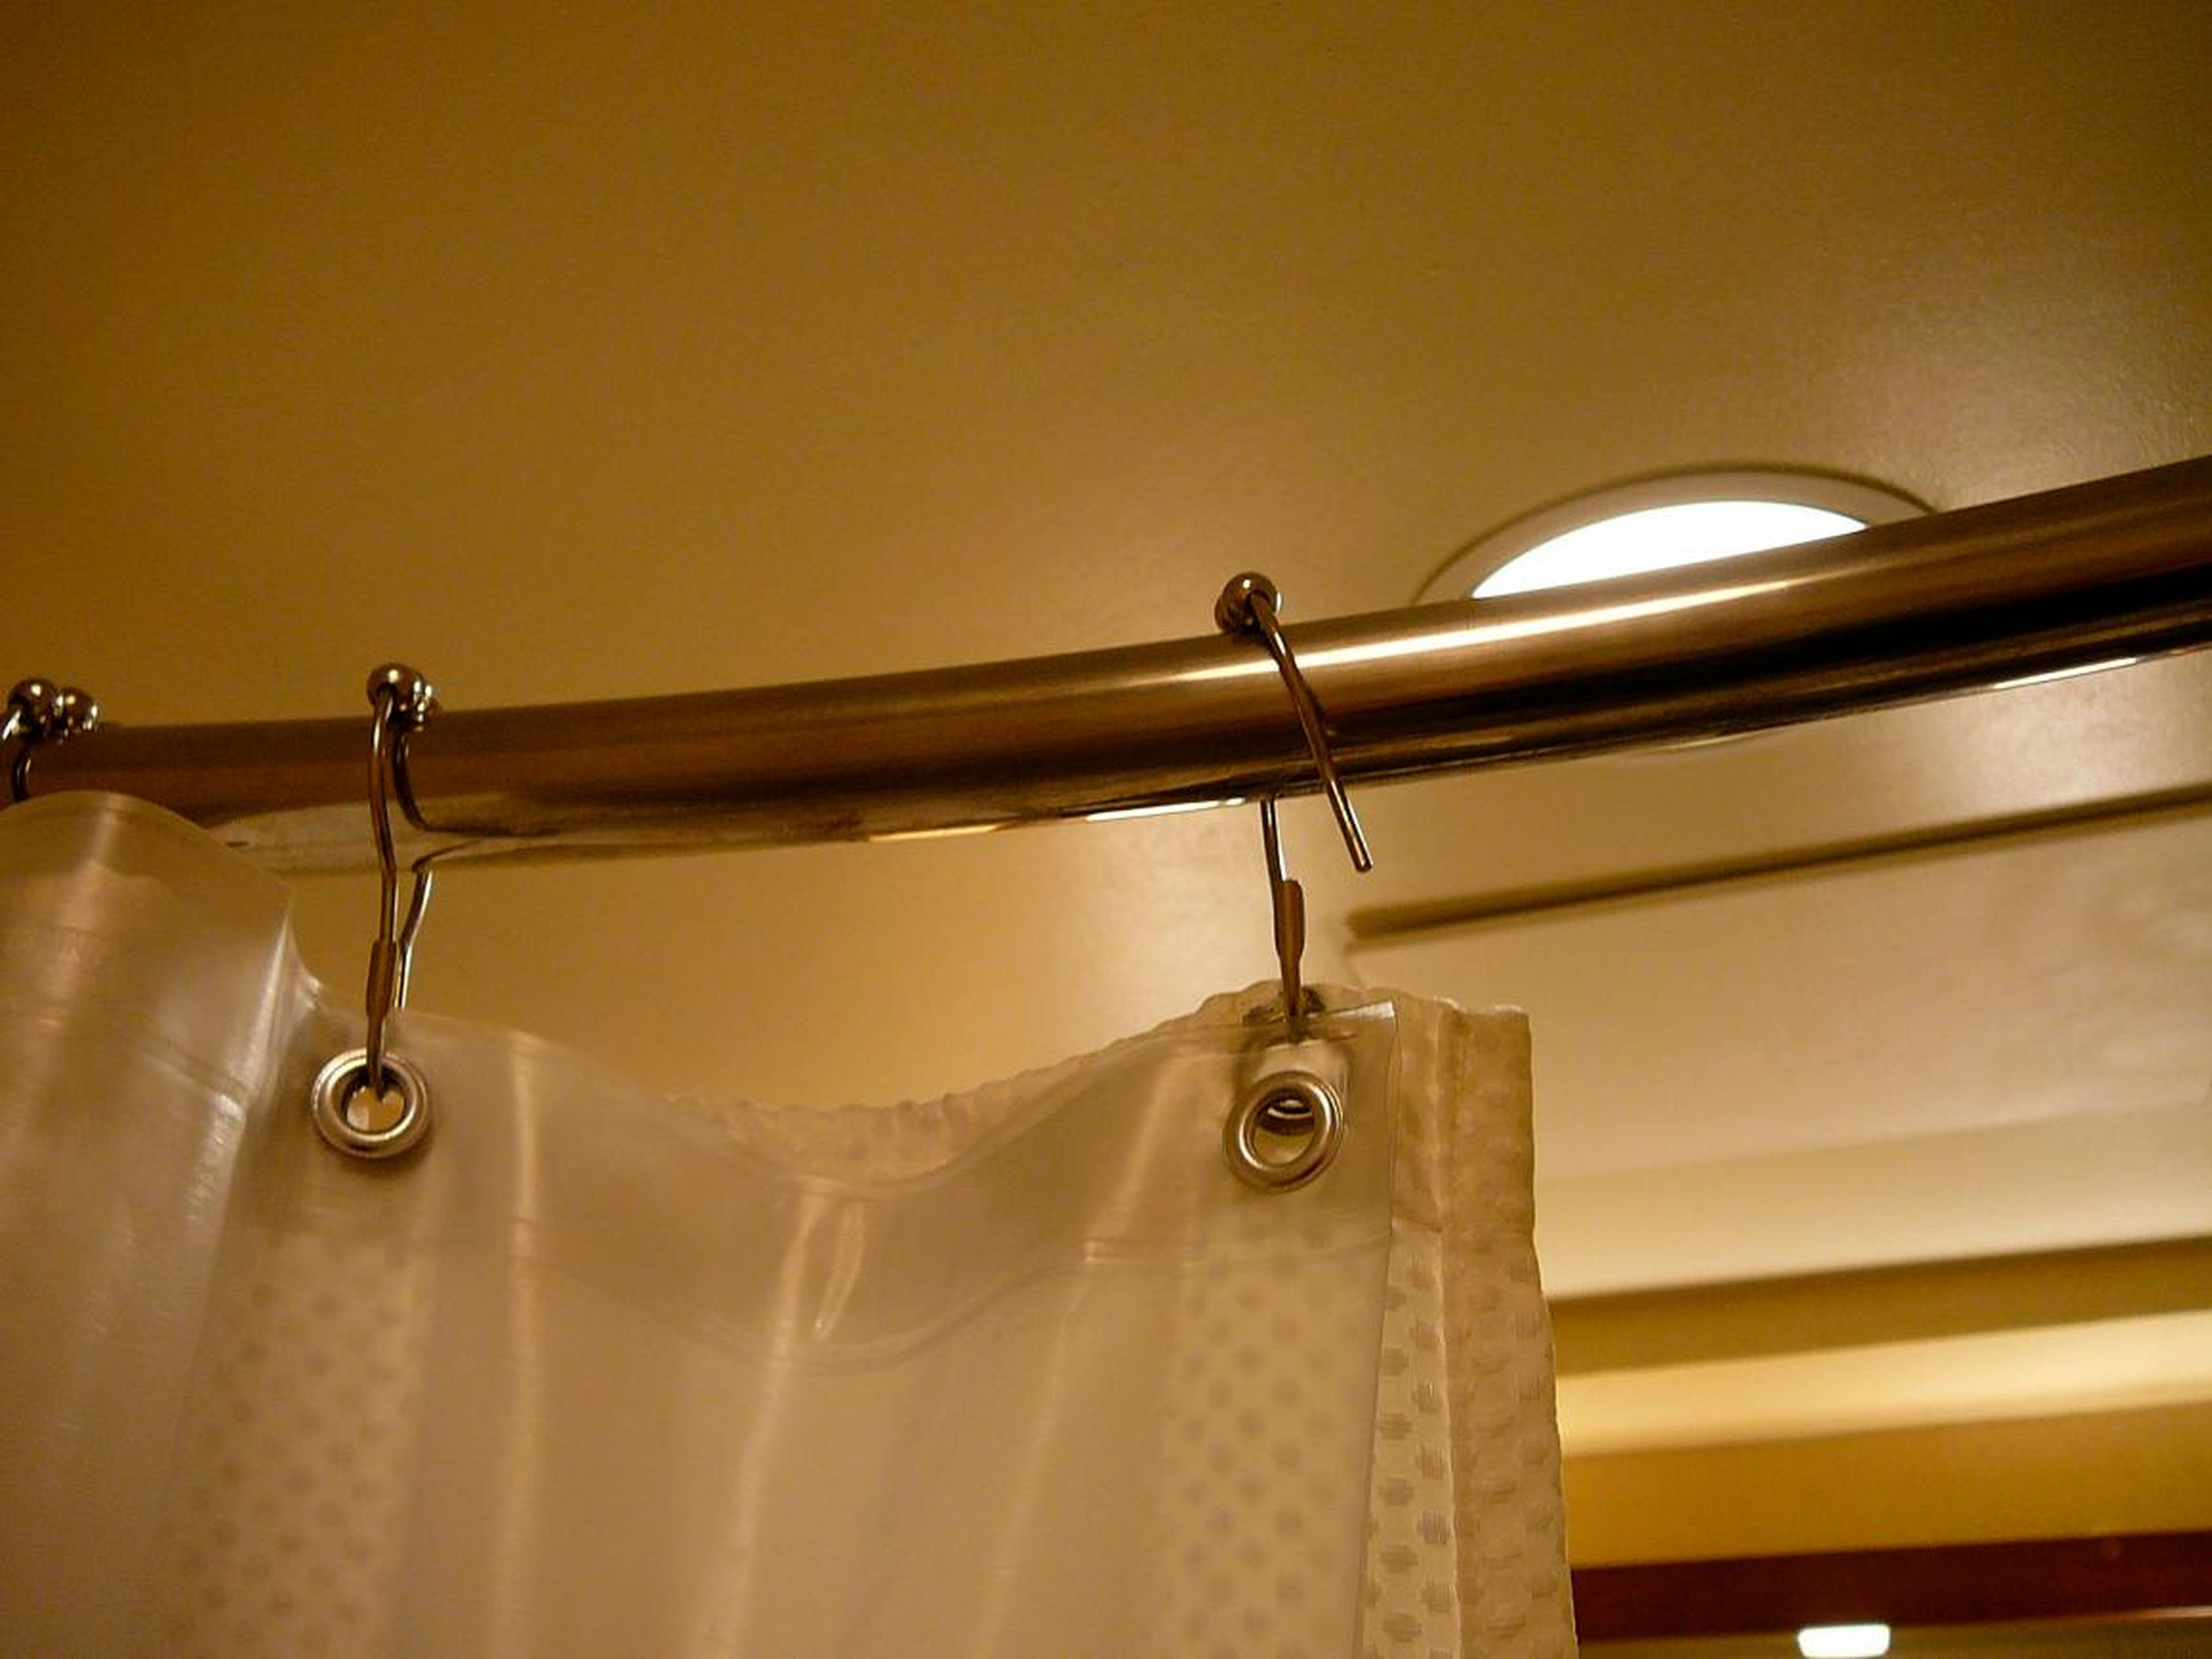 If you have a plastic shower curtain, put it in the wash every one to two weeks.